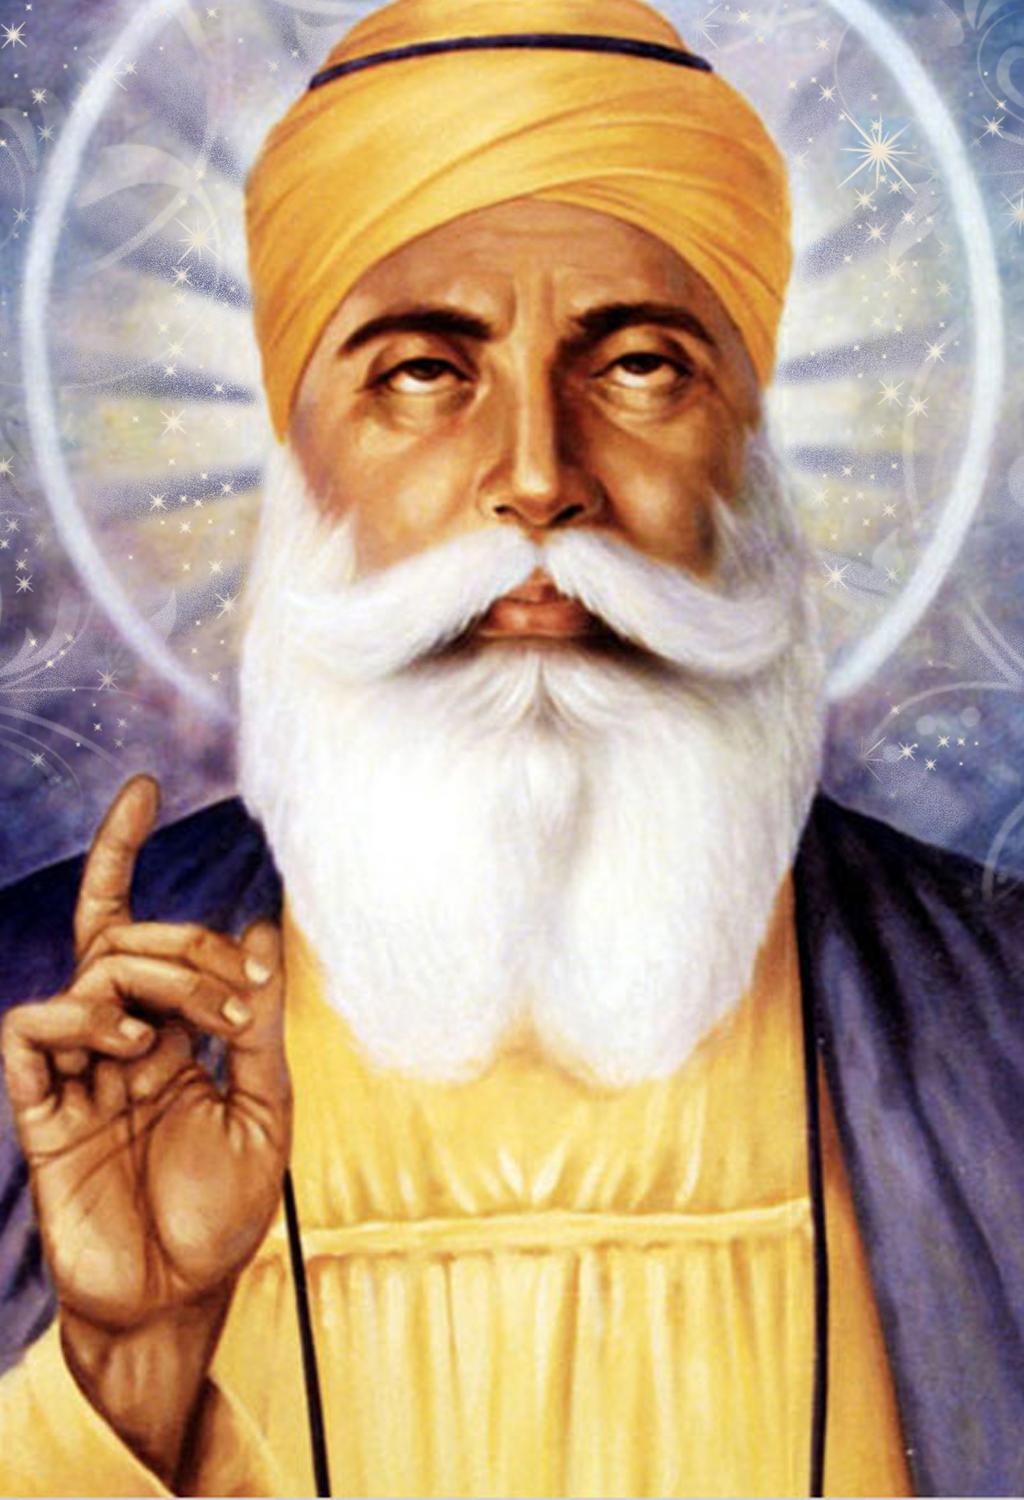 GuruNanak and the Age of